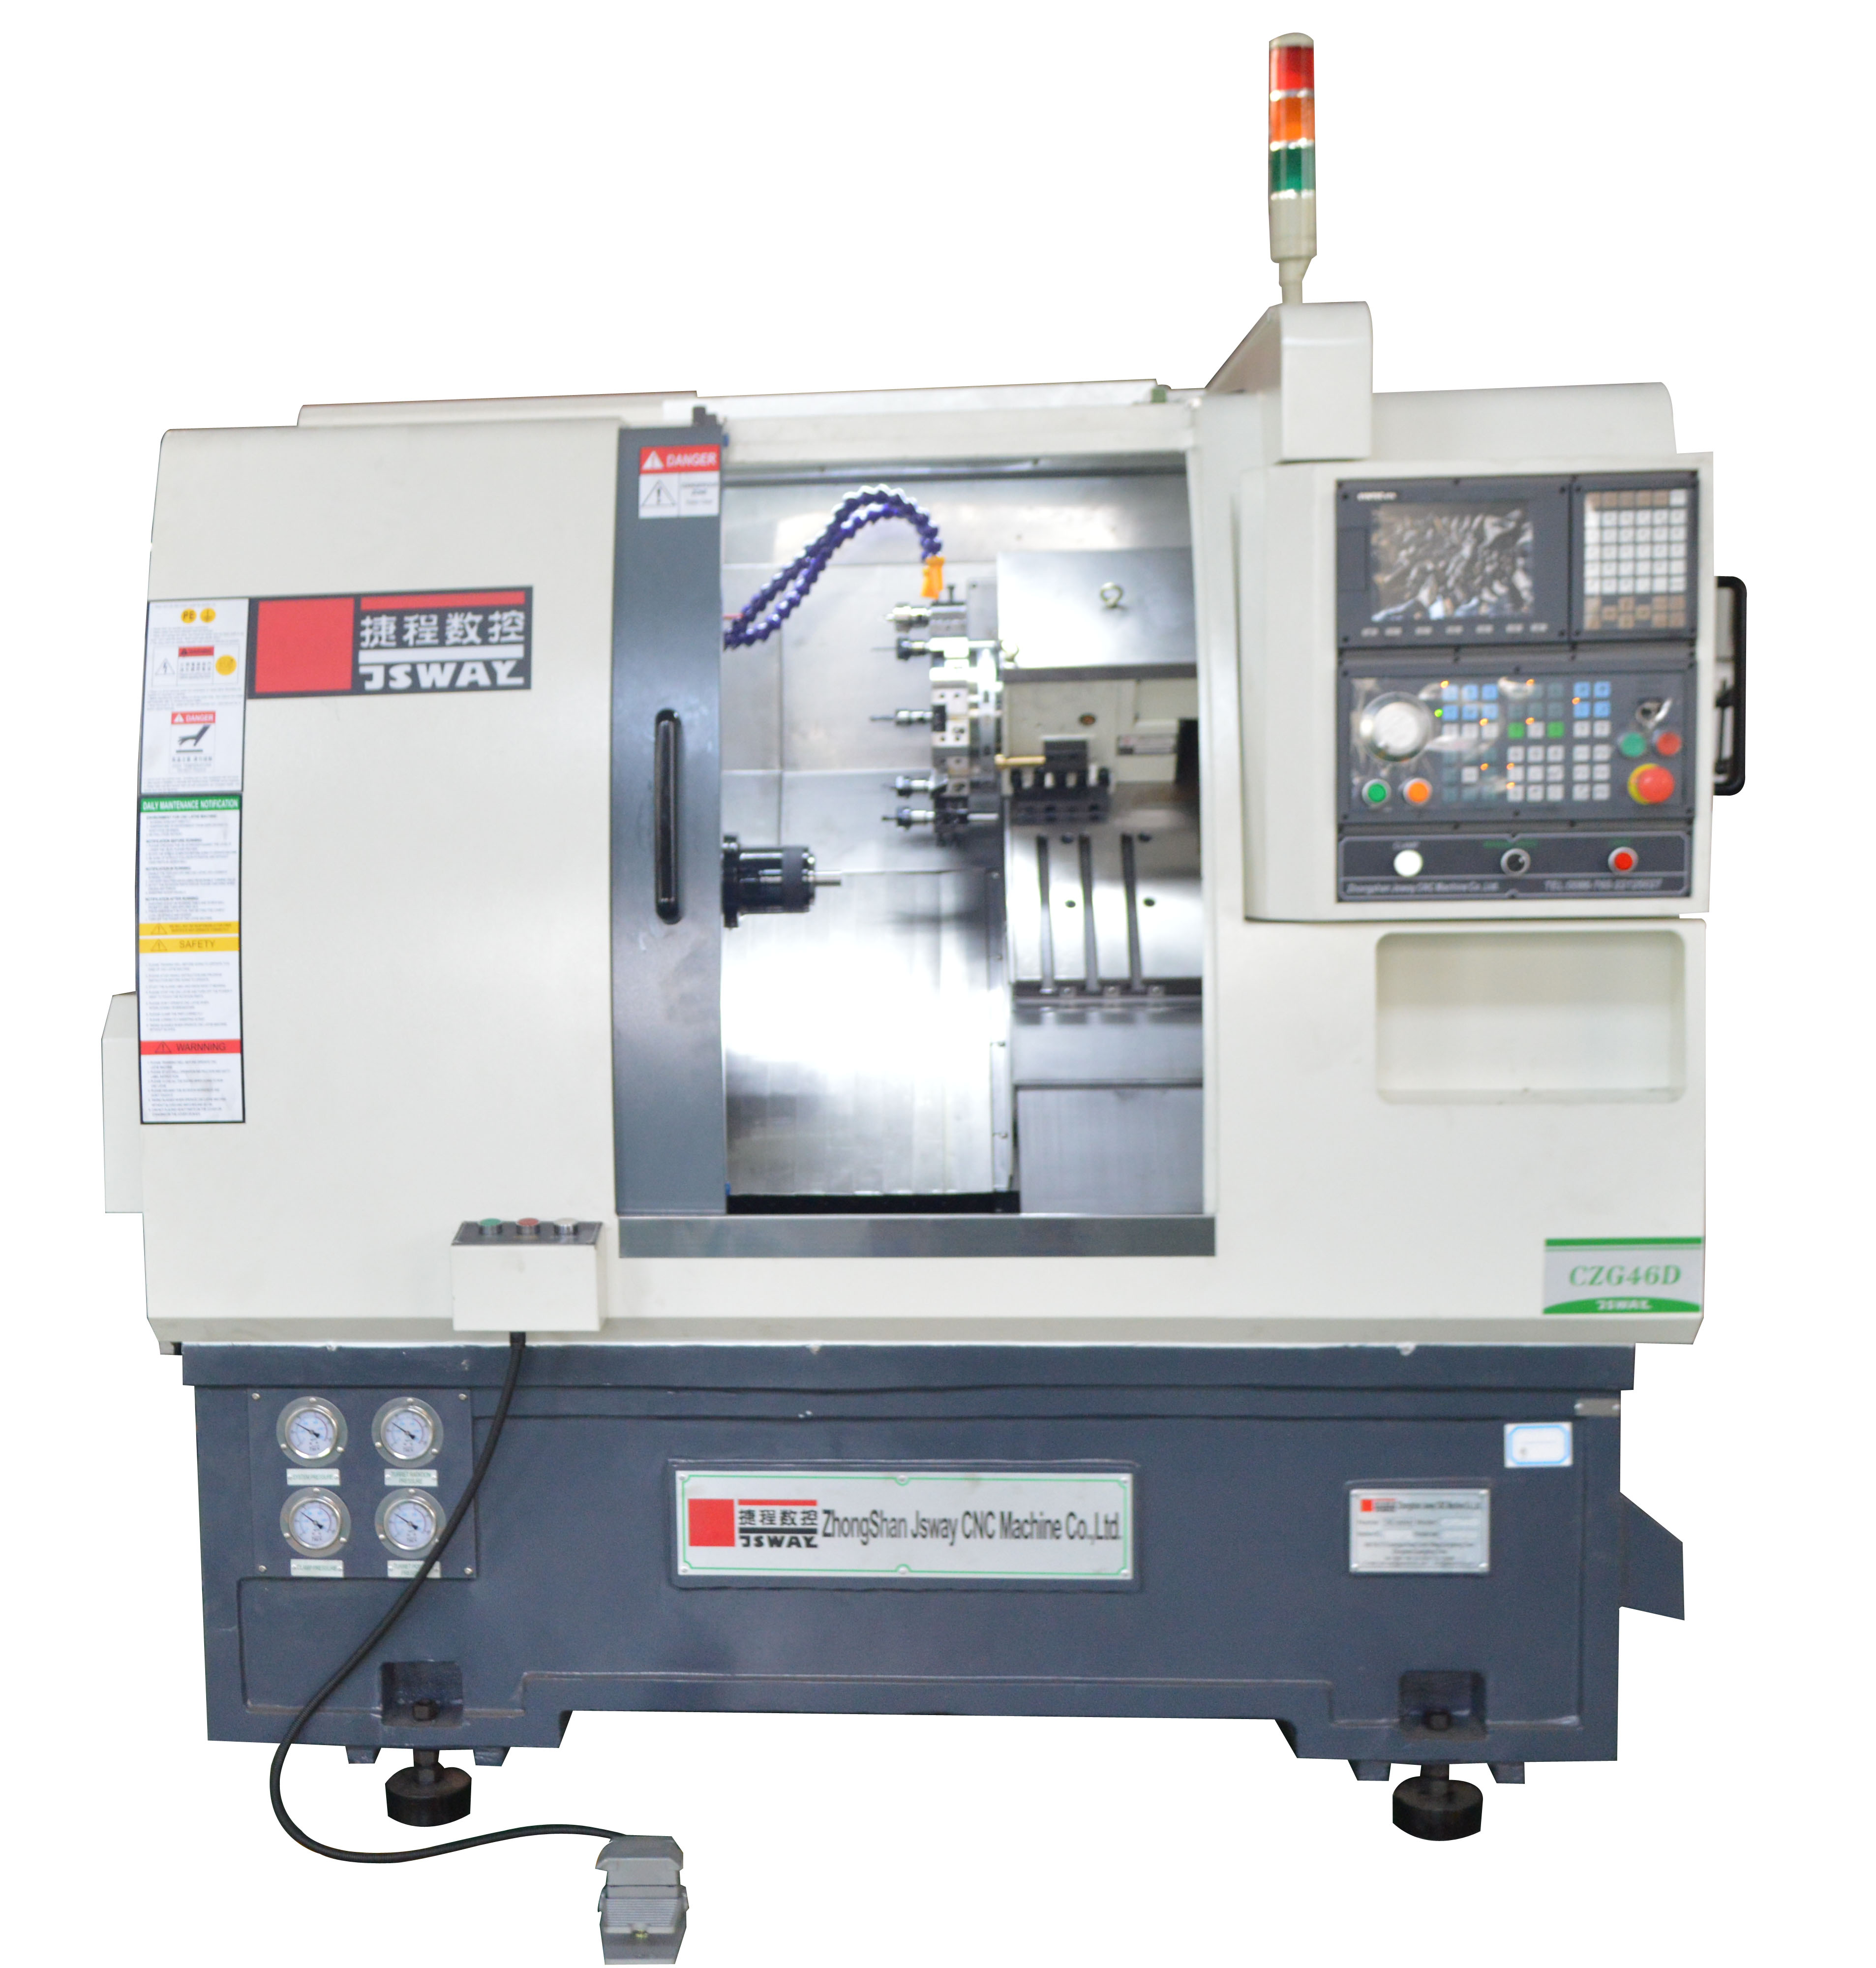 2 Axis Cnc Machine Factory 2 Axis CNC Lathe With Turret And Tailstock CZG46D